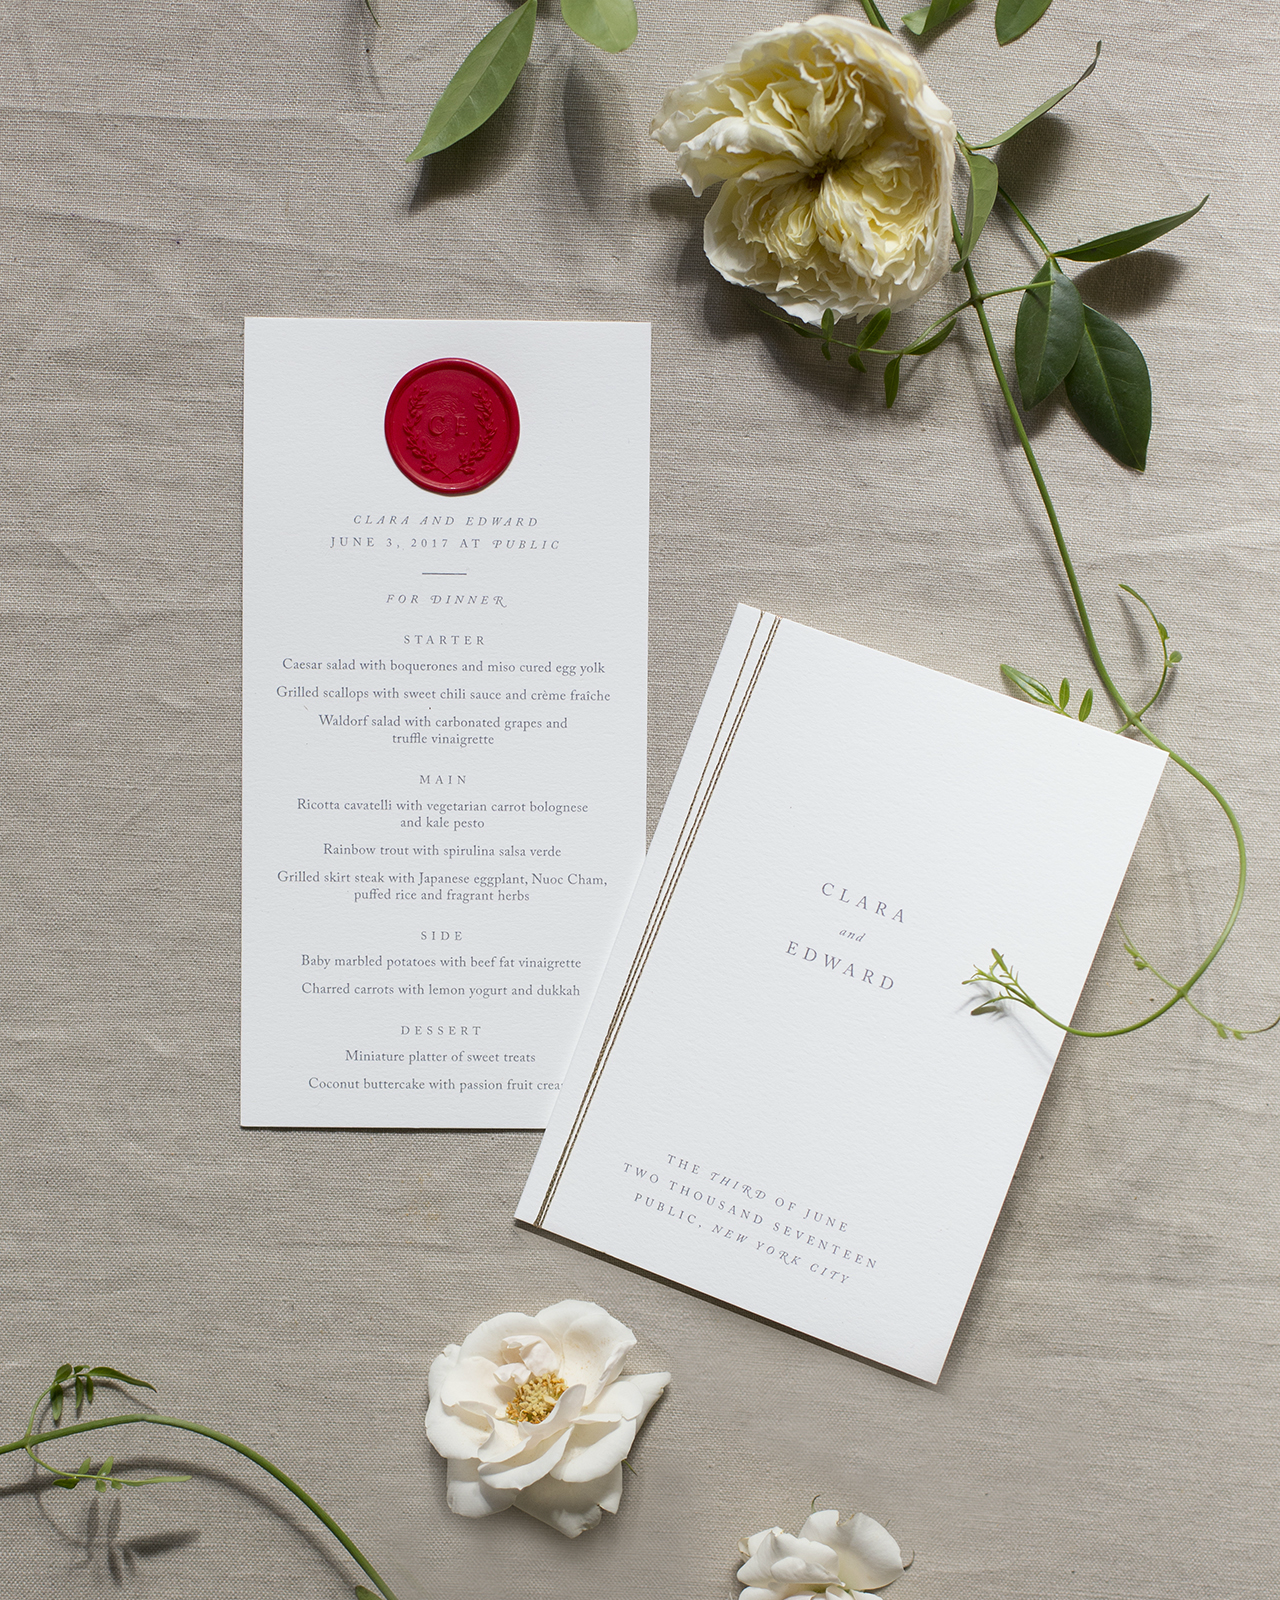 Romantic Deckle Edge Wedding Invitations with Red Wax Seal by Fourteen-Forty